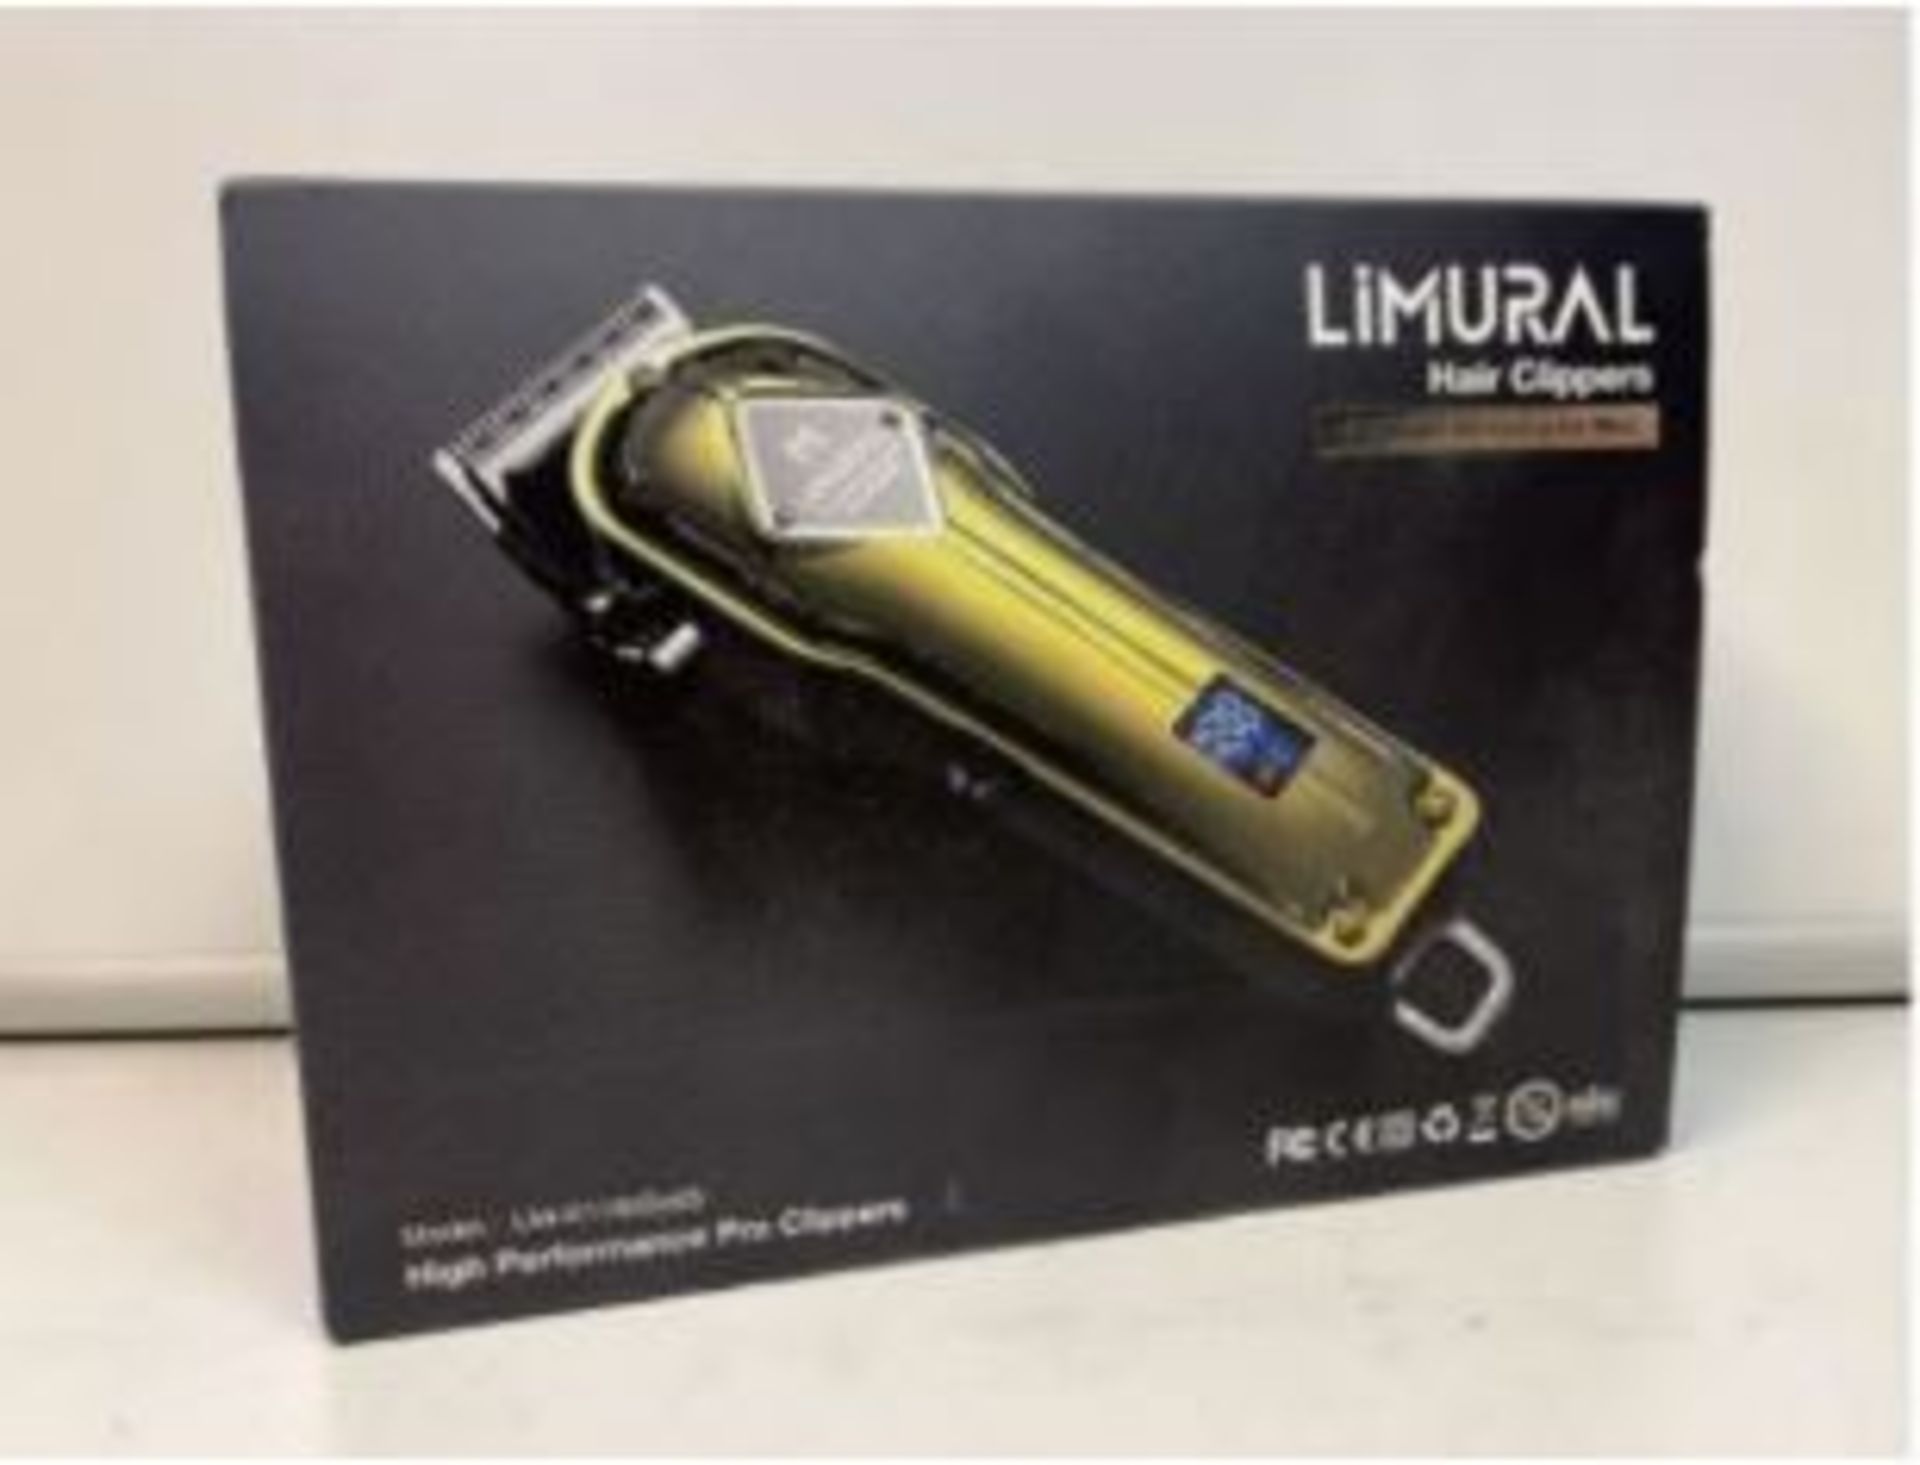 2 x BRAND NEW BOXED LIMURAL CORDLESS HAIR CLIPPER SETS. (OFC) HIGH PERFORMANCE PRO CLIPPER SET.